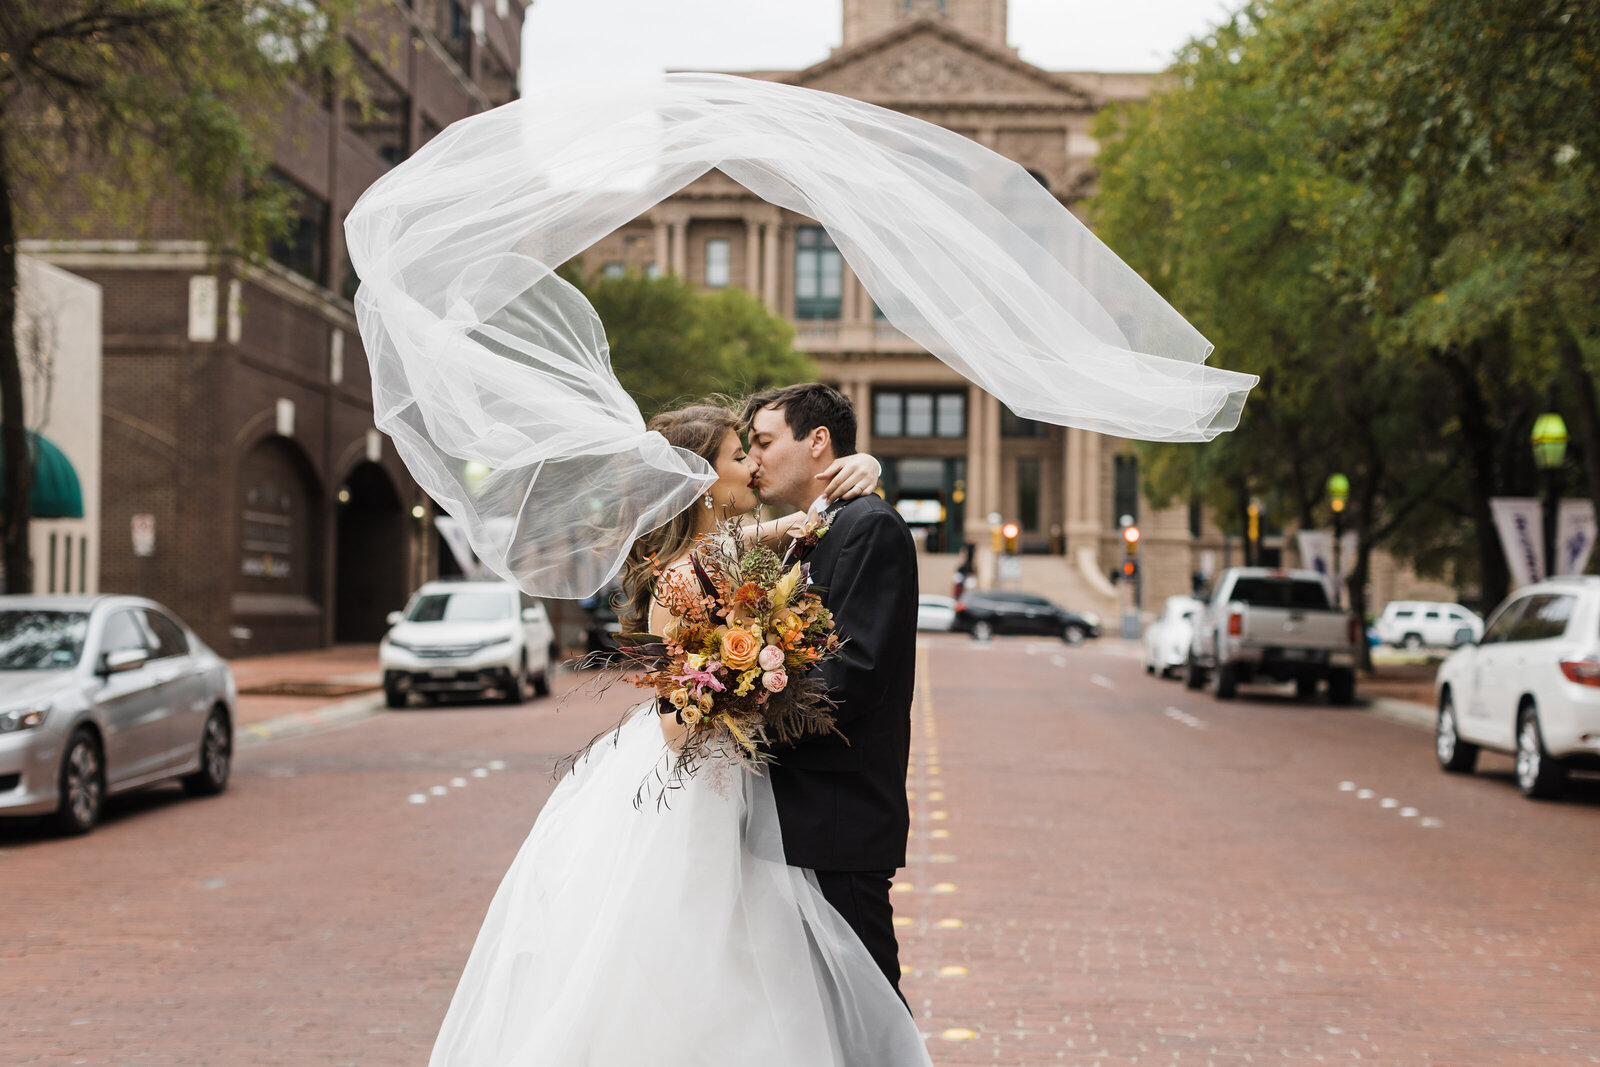 A bride and groom kiss in front of the Tarrant County Courthouse in downtown Fort Worth, Texas. The bride's veil wraps around the couple and perfectly frames their faces in a circular motion. The bride is holding an orange, earthy bouquet and is wearing a full, white dress. The groom is in a black suit. It's a cloudy and windy day.